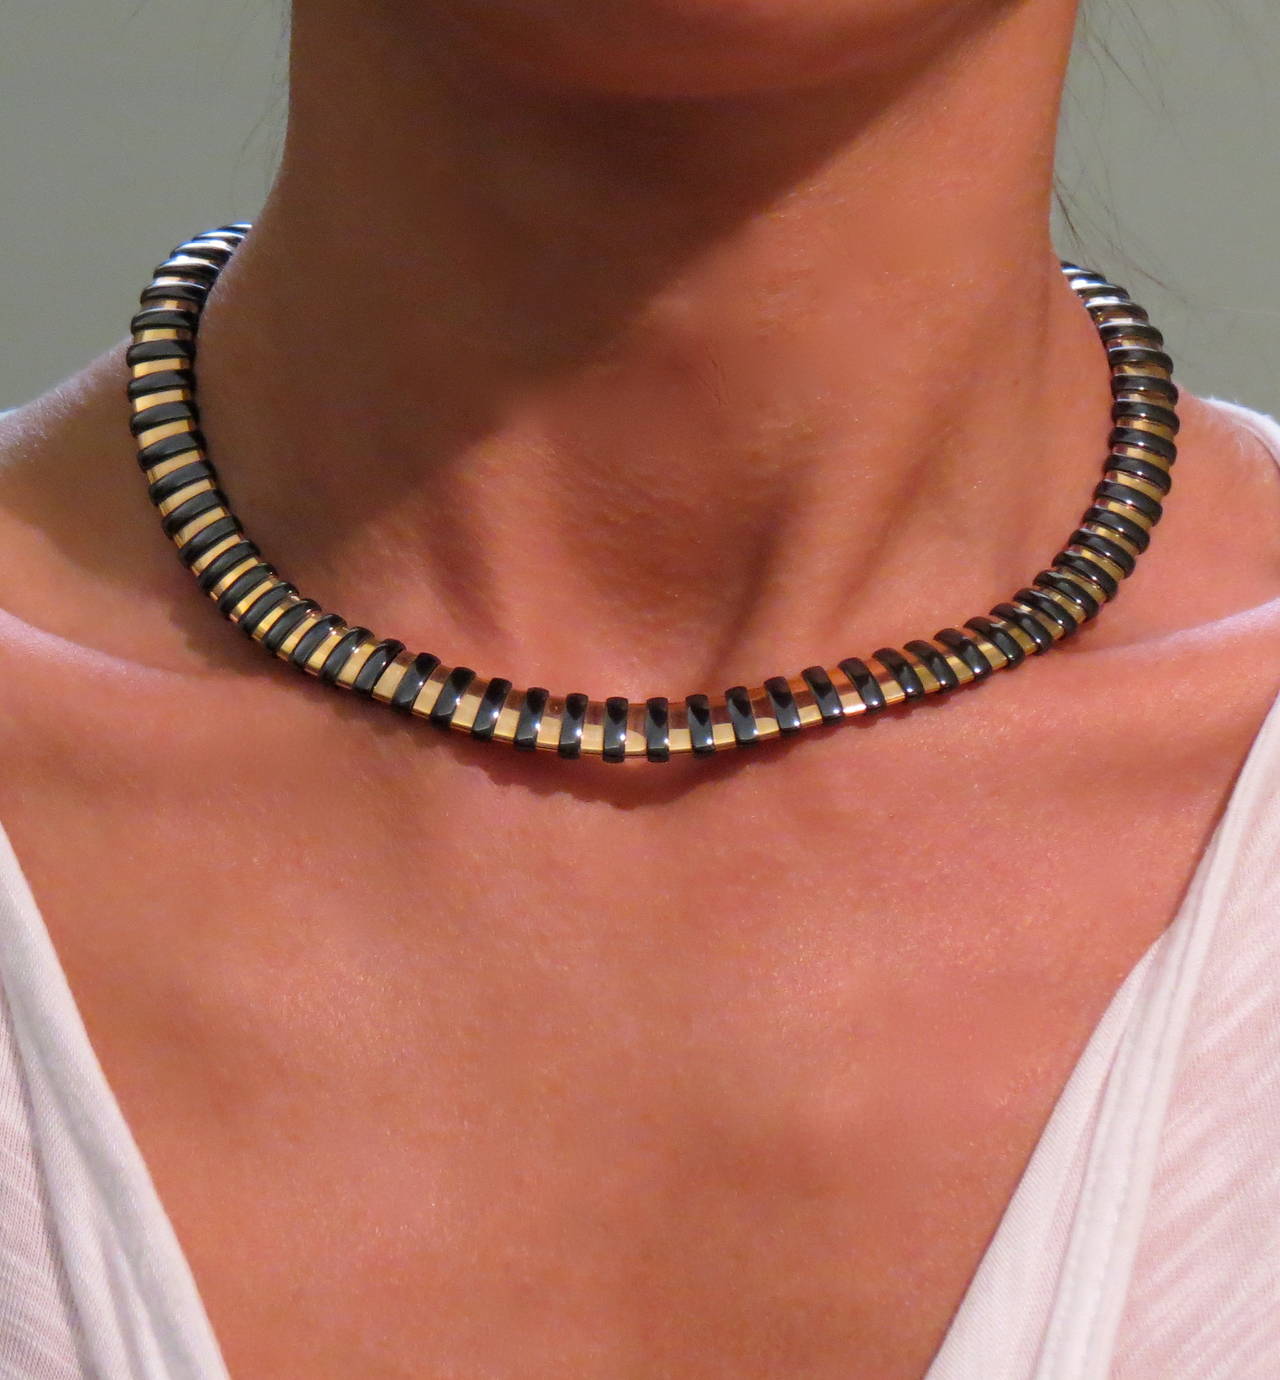 Jona design collection, hand crafted 18k rose gold and black high-tech
ceramic choker necklace.
With a hardness approaching that of diamond, high-tech ceramic is a highly
scratch-resistant material. Light and biocompatible, it is extremely